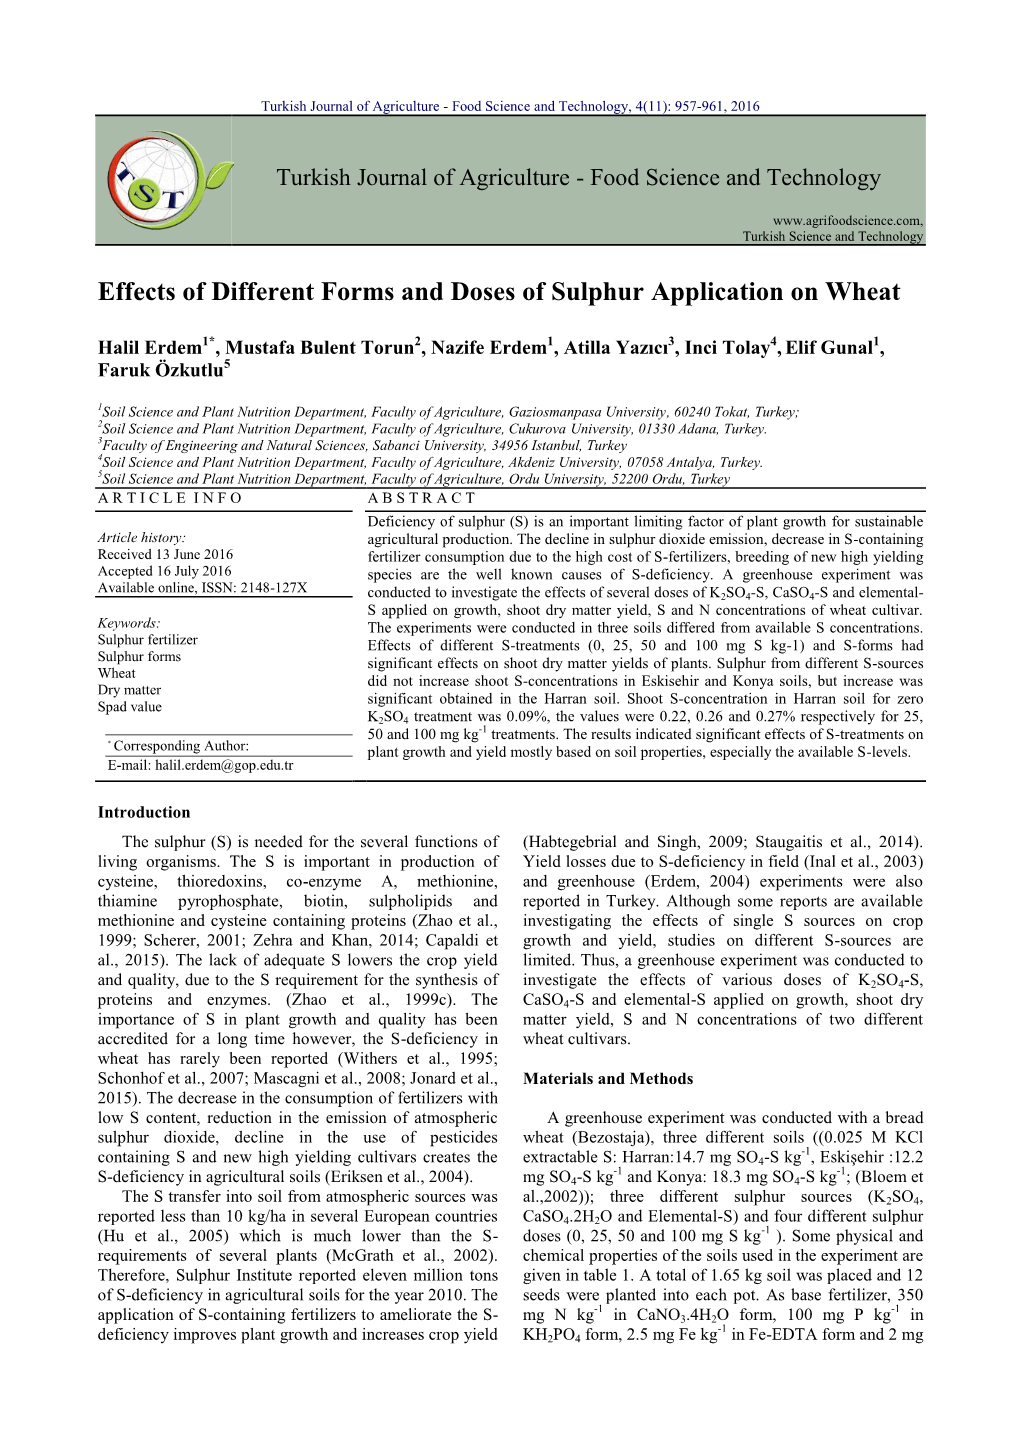 Effects of Different Forms and Doses of Sulphur Application on Wheat